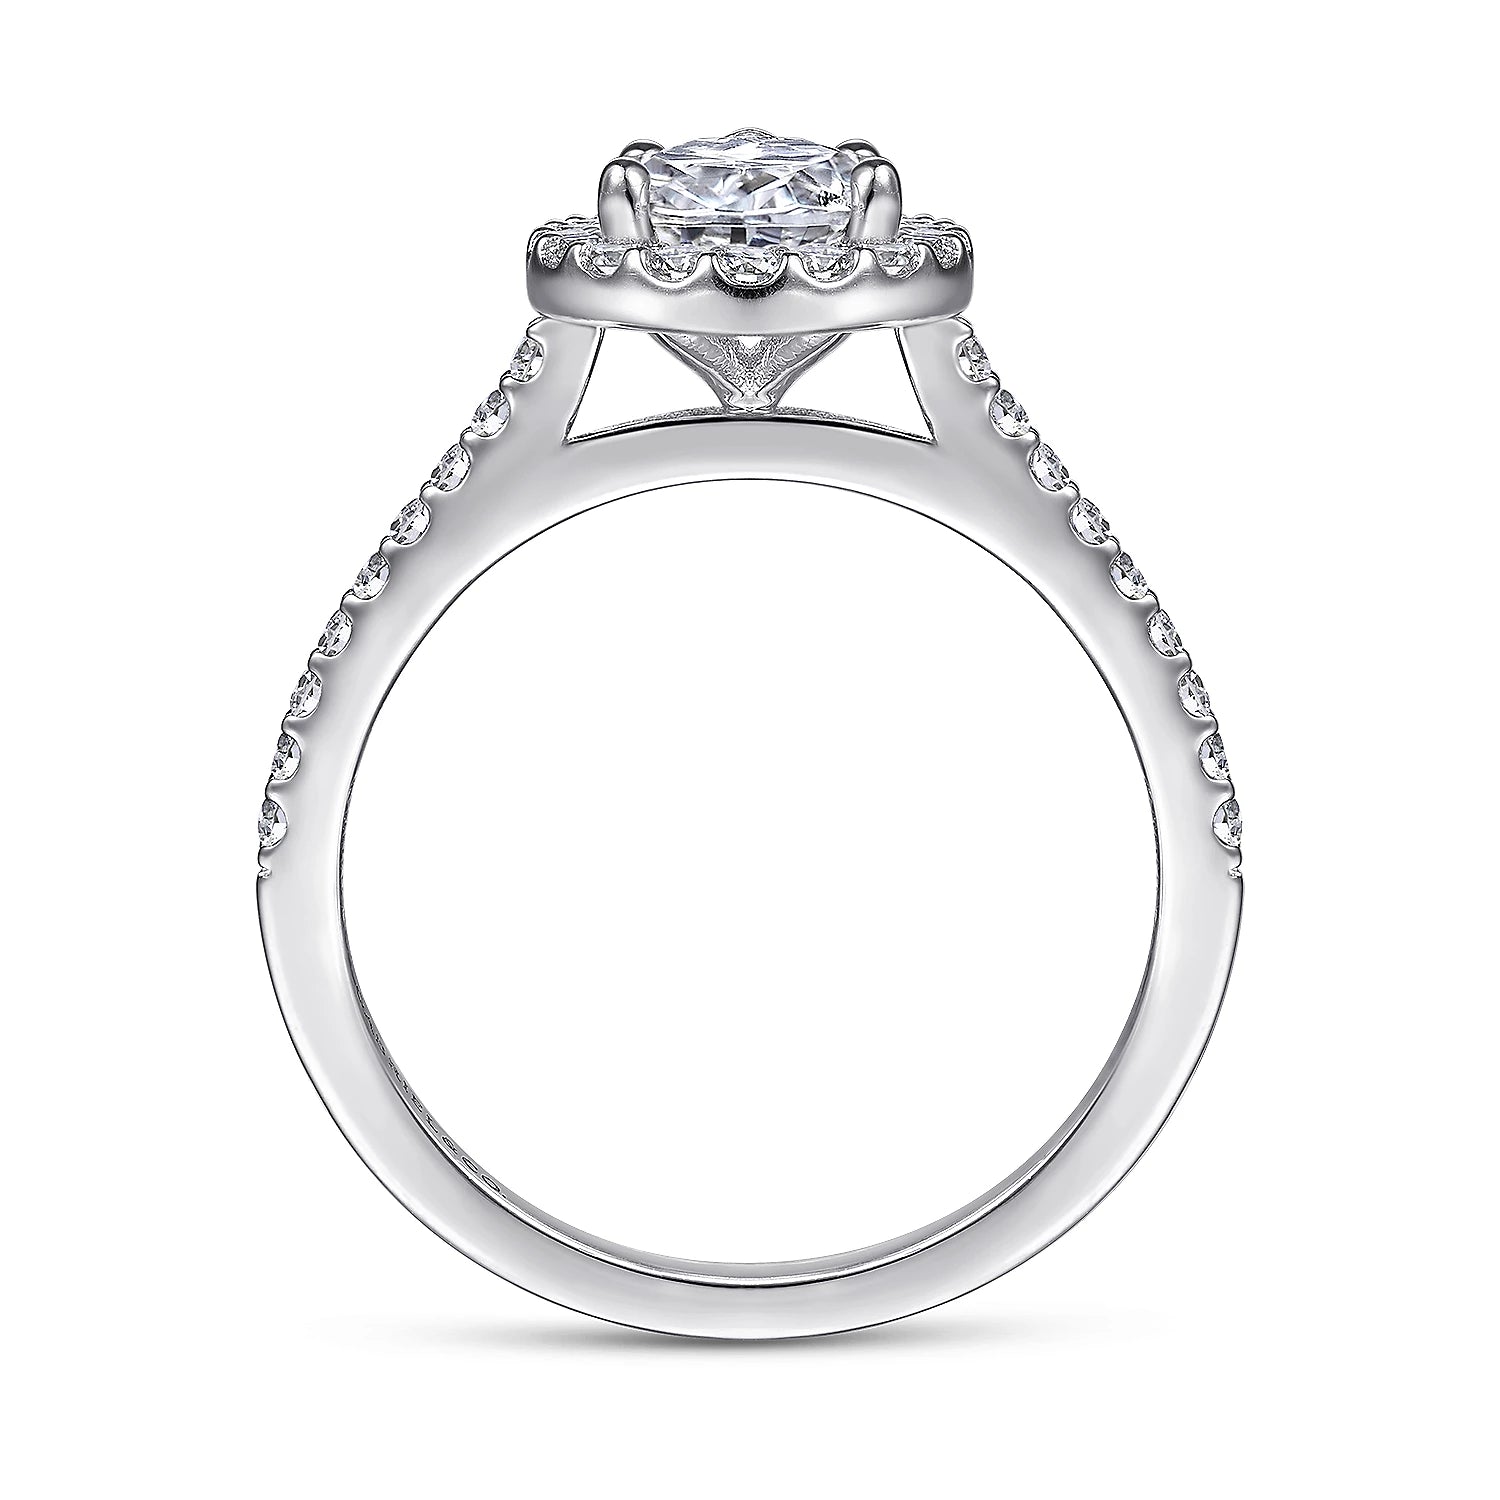 The Kwiat Setting Engagement Ring With An East-West Oval, 60% OFF